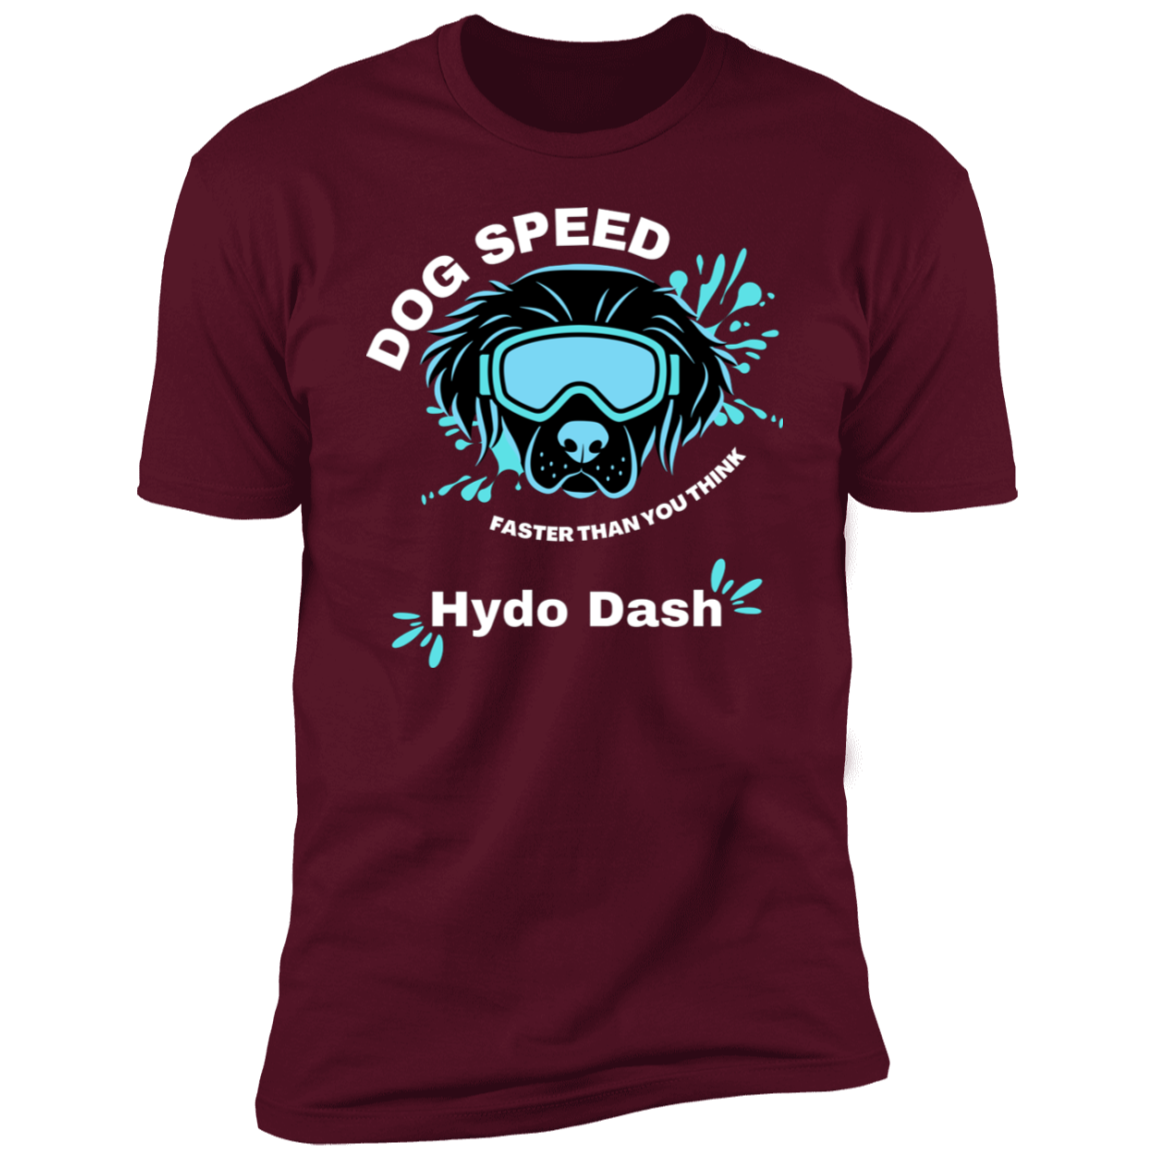 Dog Speed Faster Than You Think Hydro Dash T-shirt, Hydro Dash shirt dog shirt for humans, in maroon